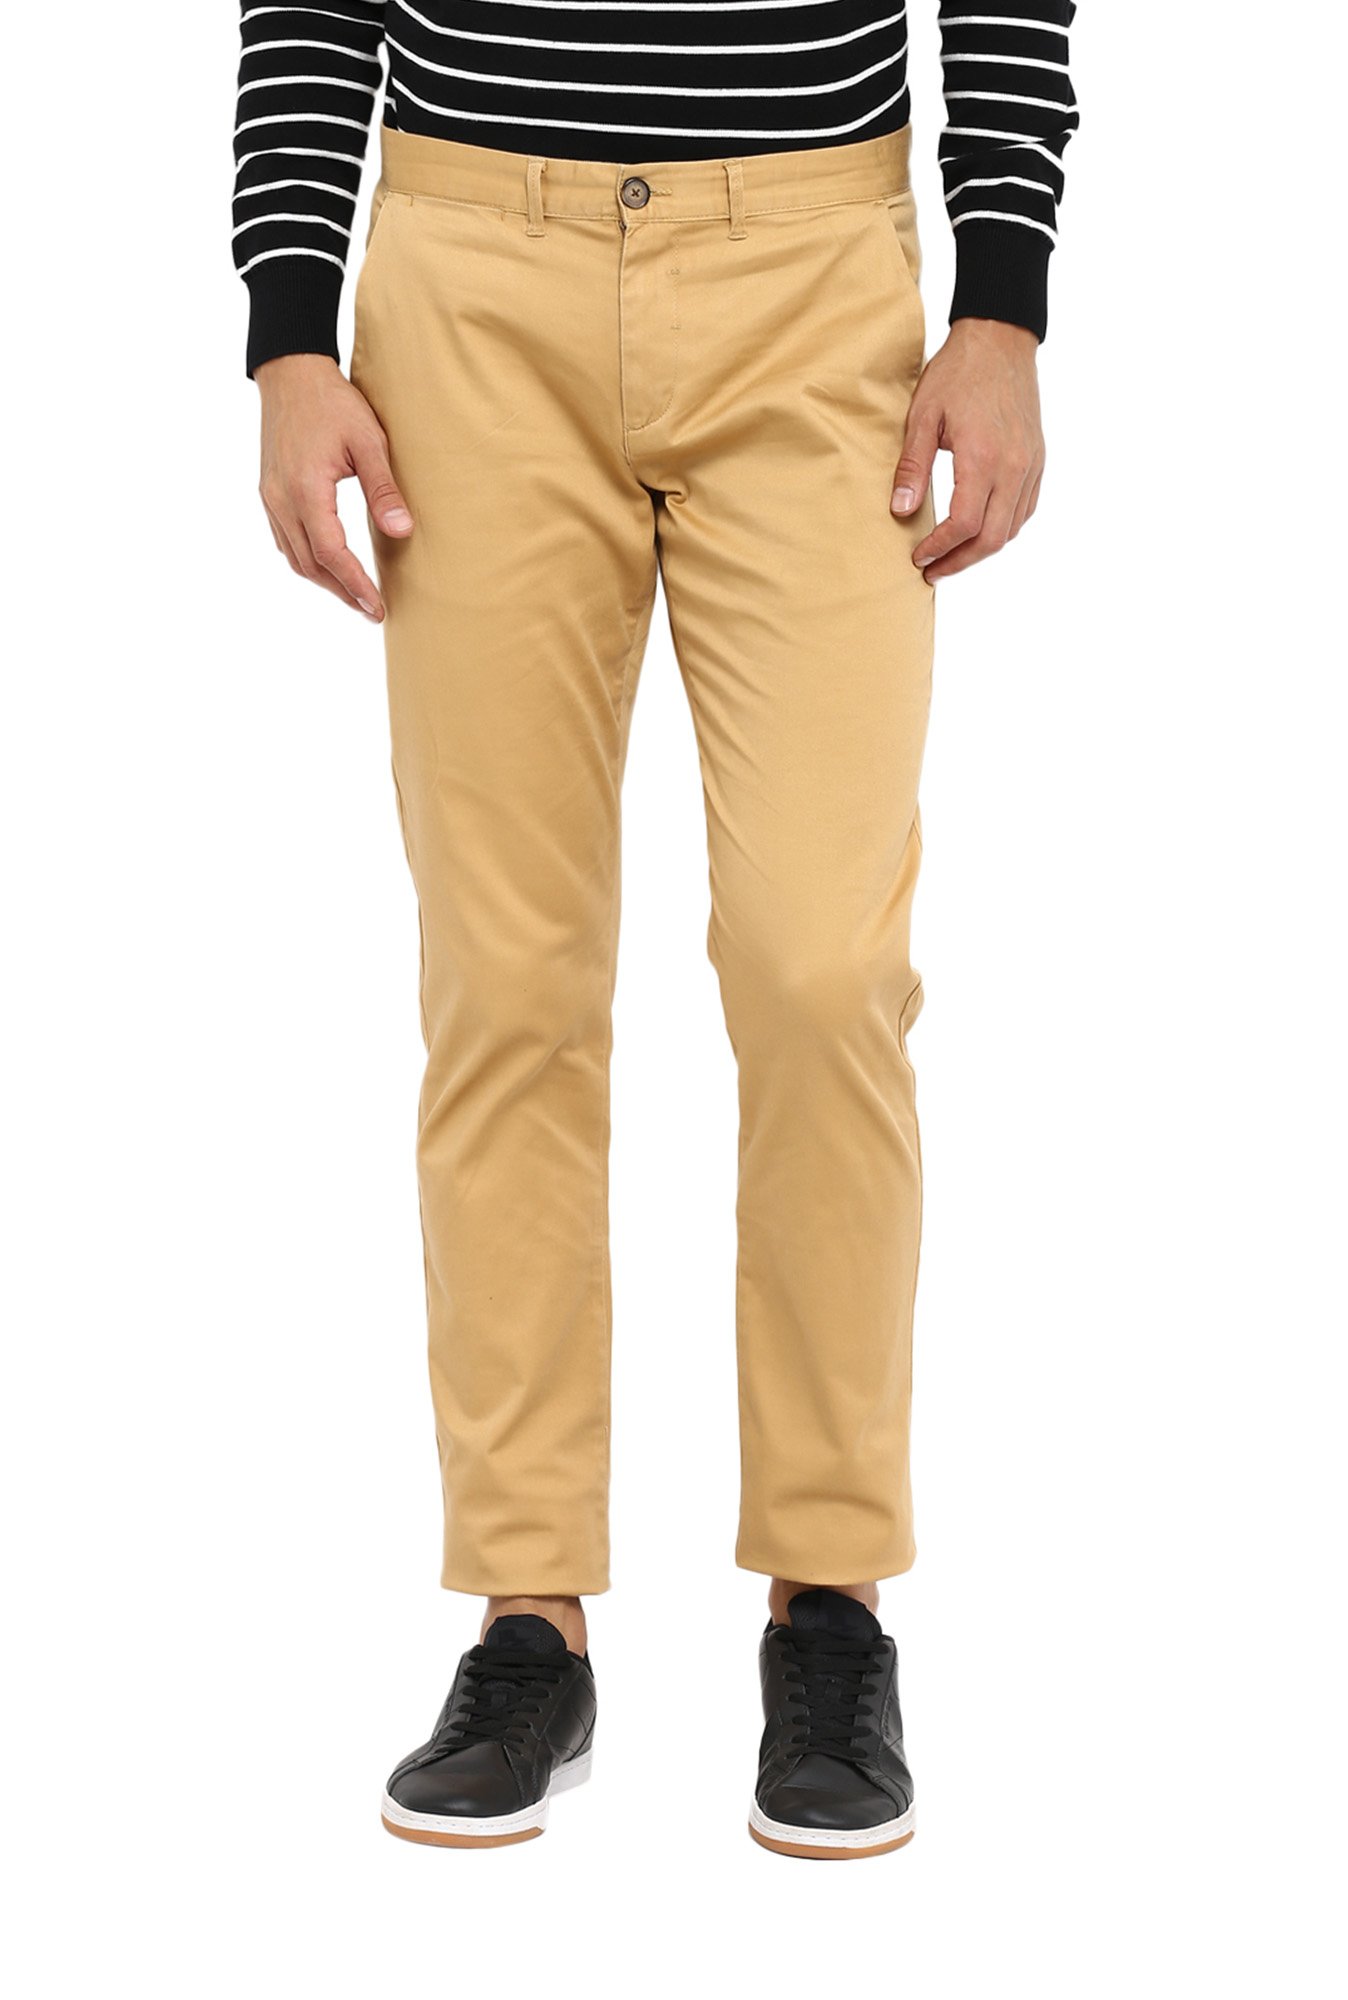 Buy Gold Trousers  Pants for Men by RED TAPE Online  Ajiocom